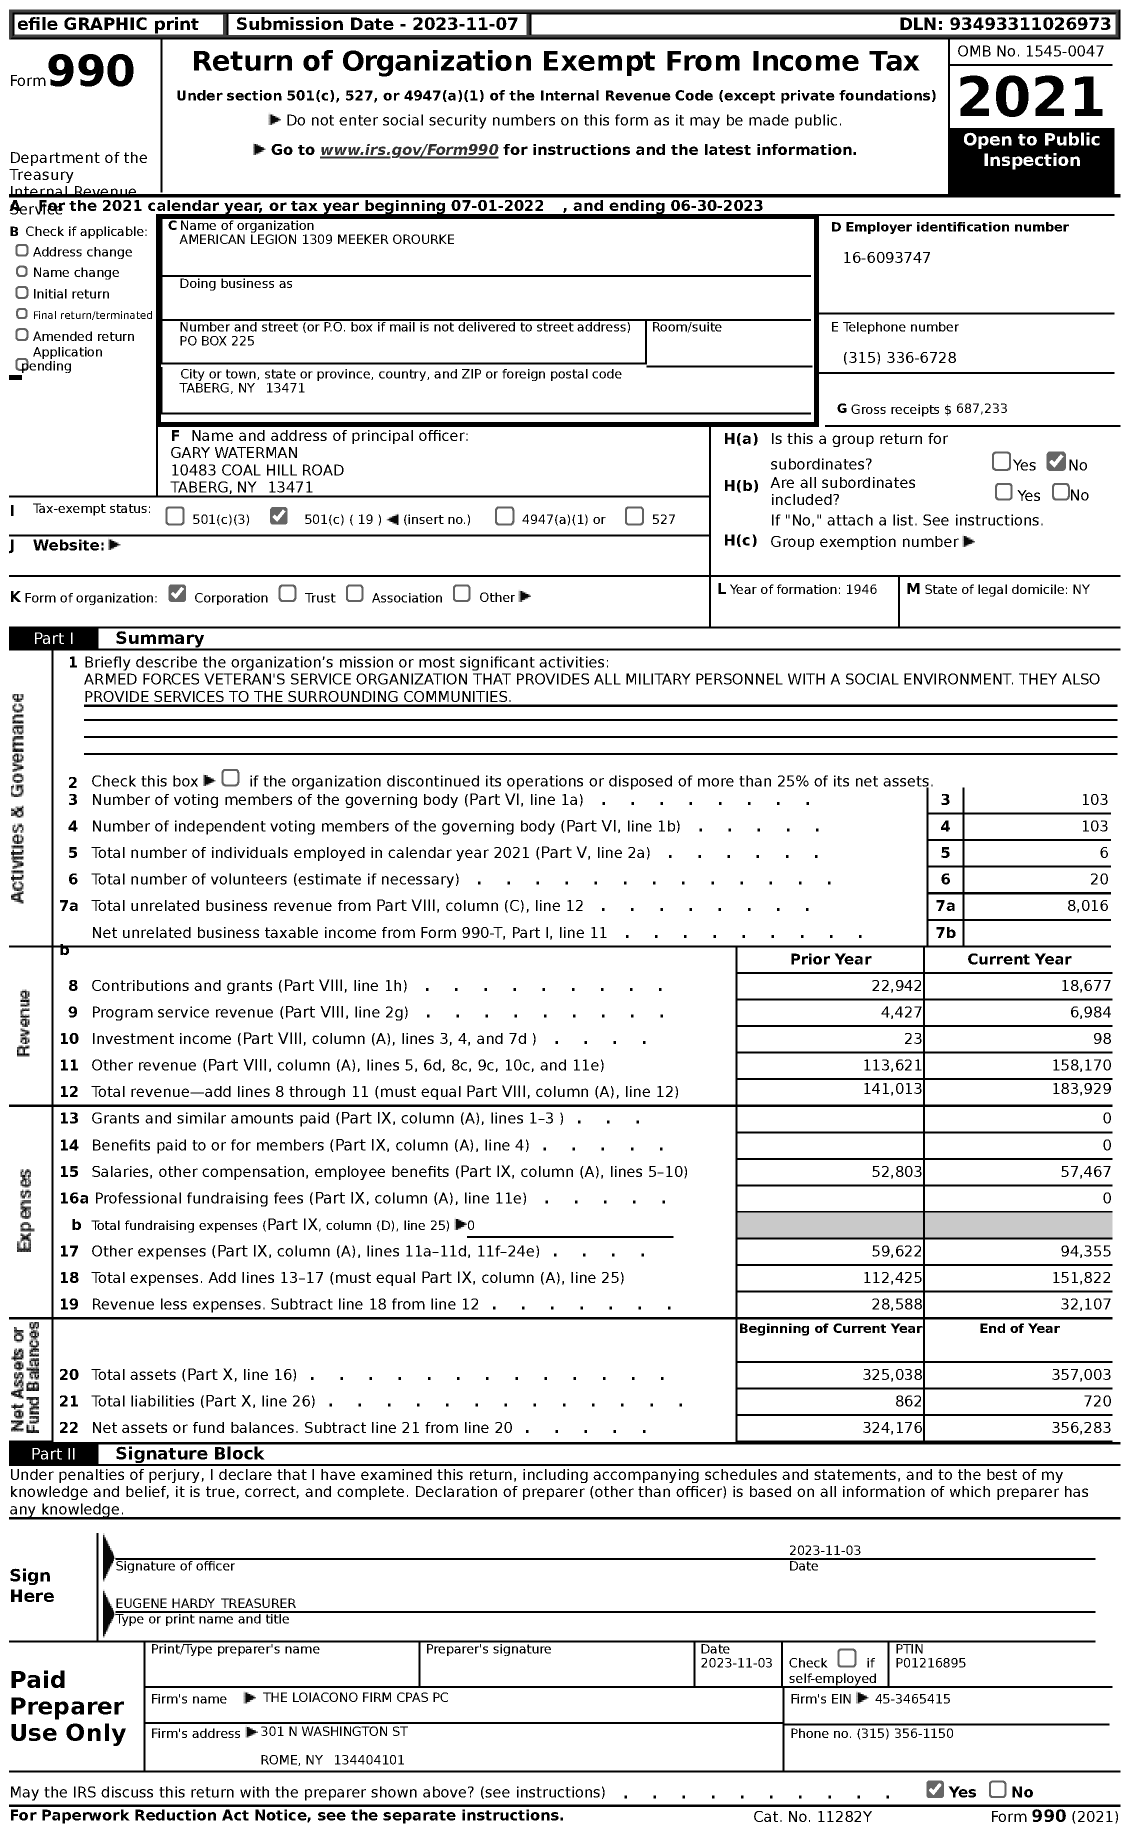 Image of first page of 2022 Form 990 for American Legion - 1309 Meeker ORourke